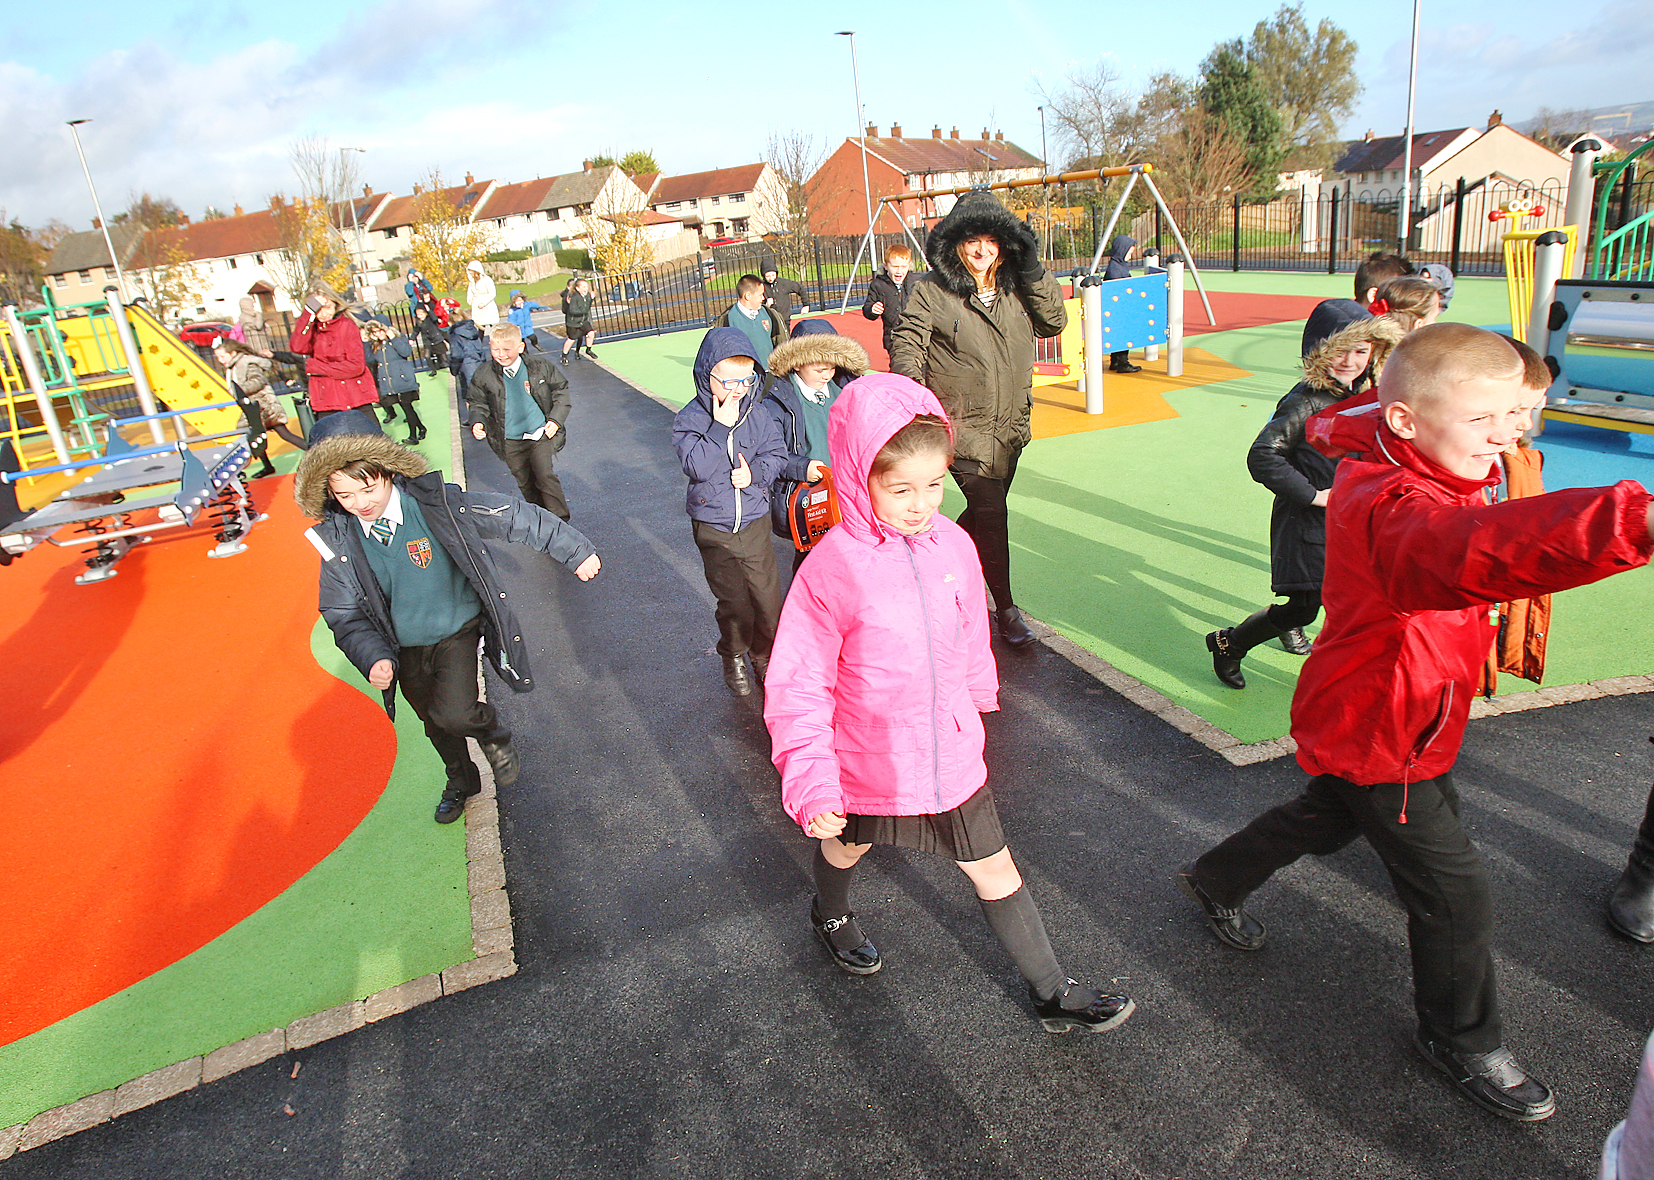 OPEN FOR ALL: Children enjoying the new playpark for the first time as it opened yesterday